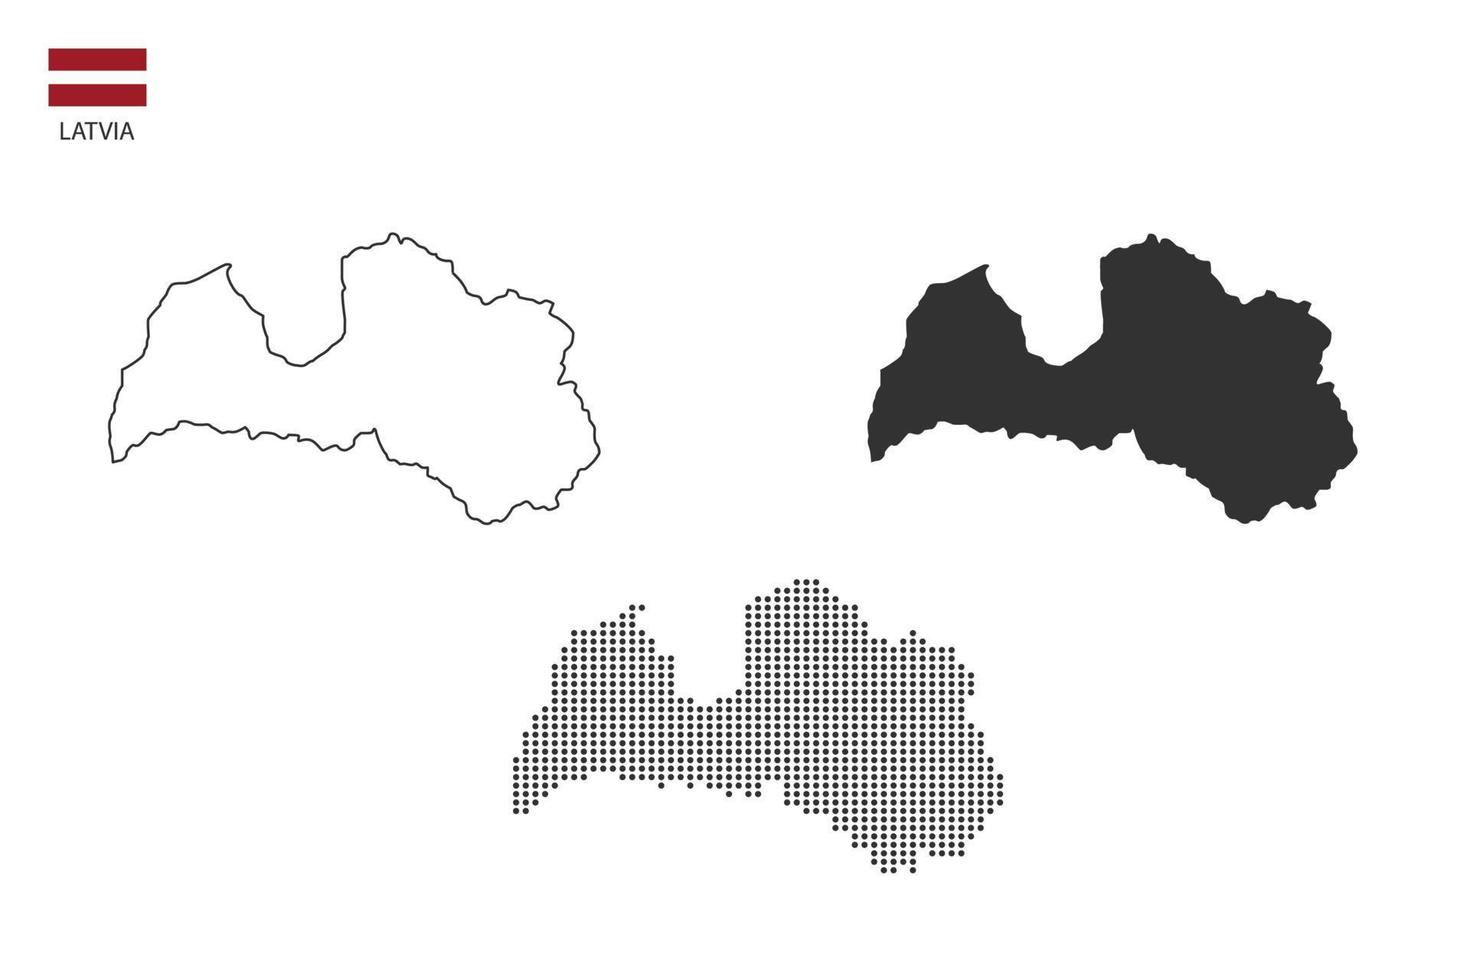 3 versions of Latvia map city vector by thin black outline simplicity style, Black dot style and Dark shadow style. All in the white background.